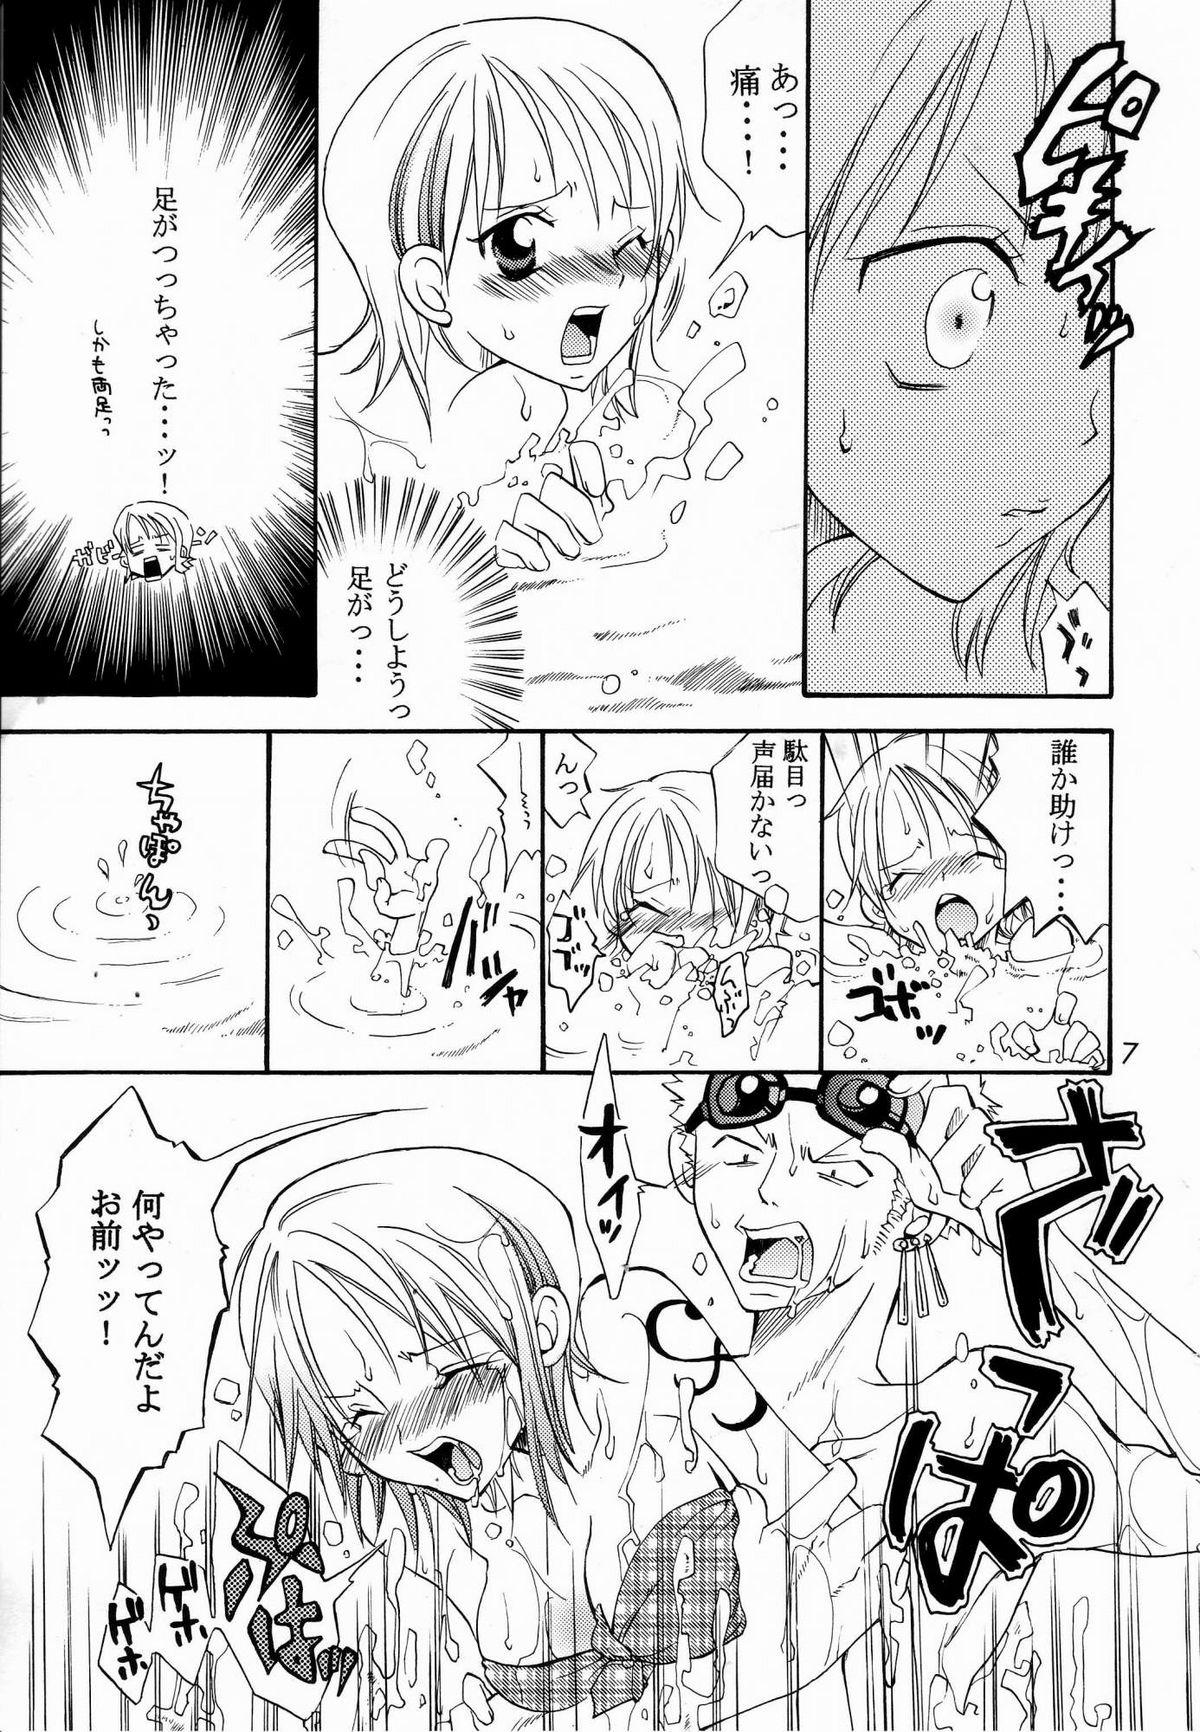 Homo Shiawase Punch! 5 - One piece Calle - Page 6